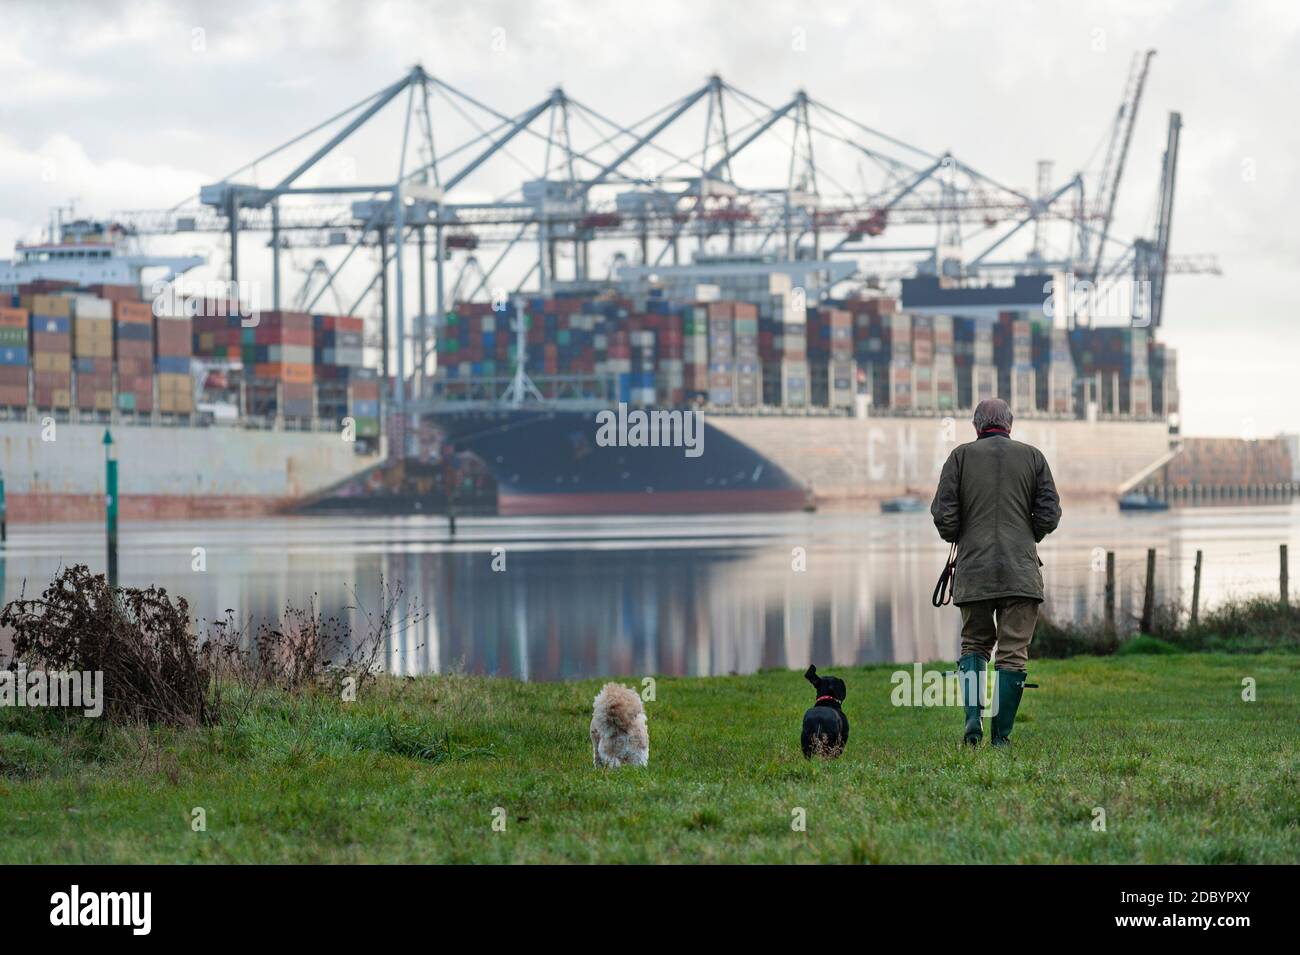 Southampton, UK, 10 Nov, 2020.   A man out walking his two dogs at Goatee Beach along the River Test near Southampton docks, as two cargo ships are loaded with containers. Stock Photo